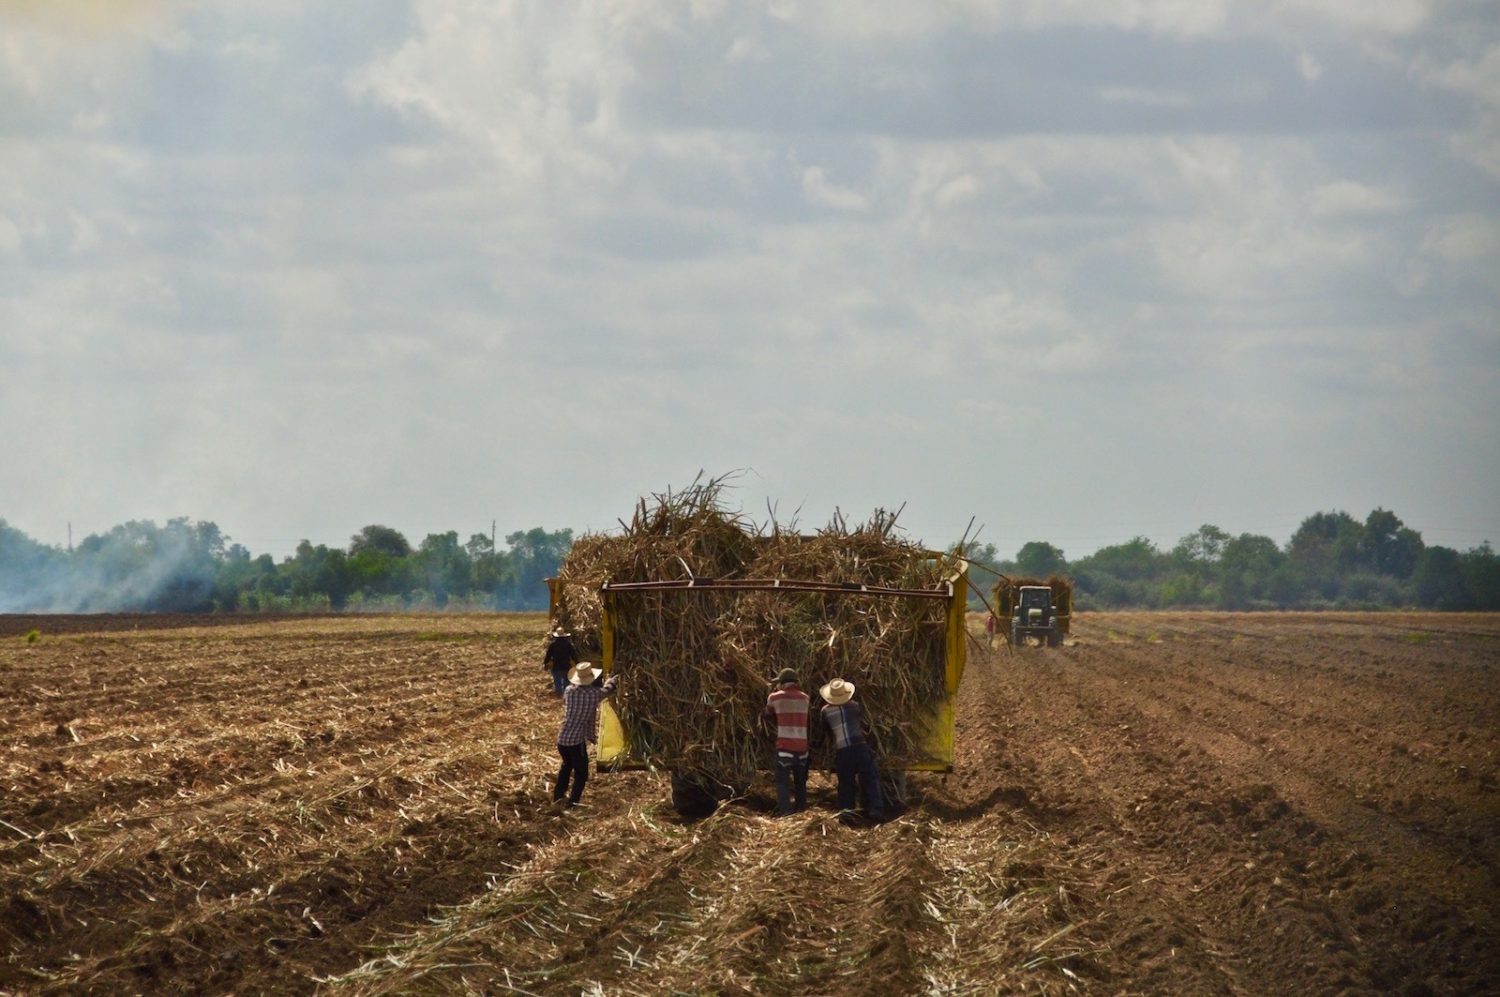 A group of farmers work a massive field pulling up truckloads of sugarcane. August 2020